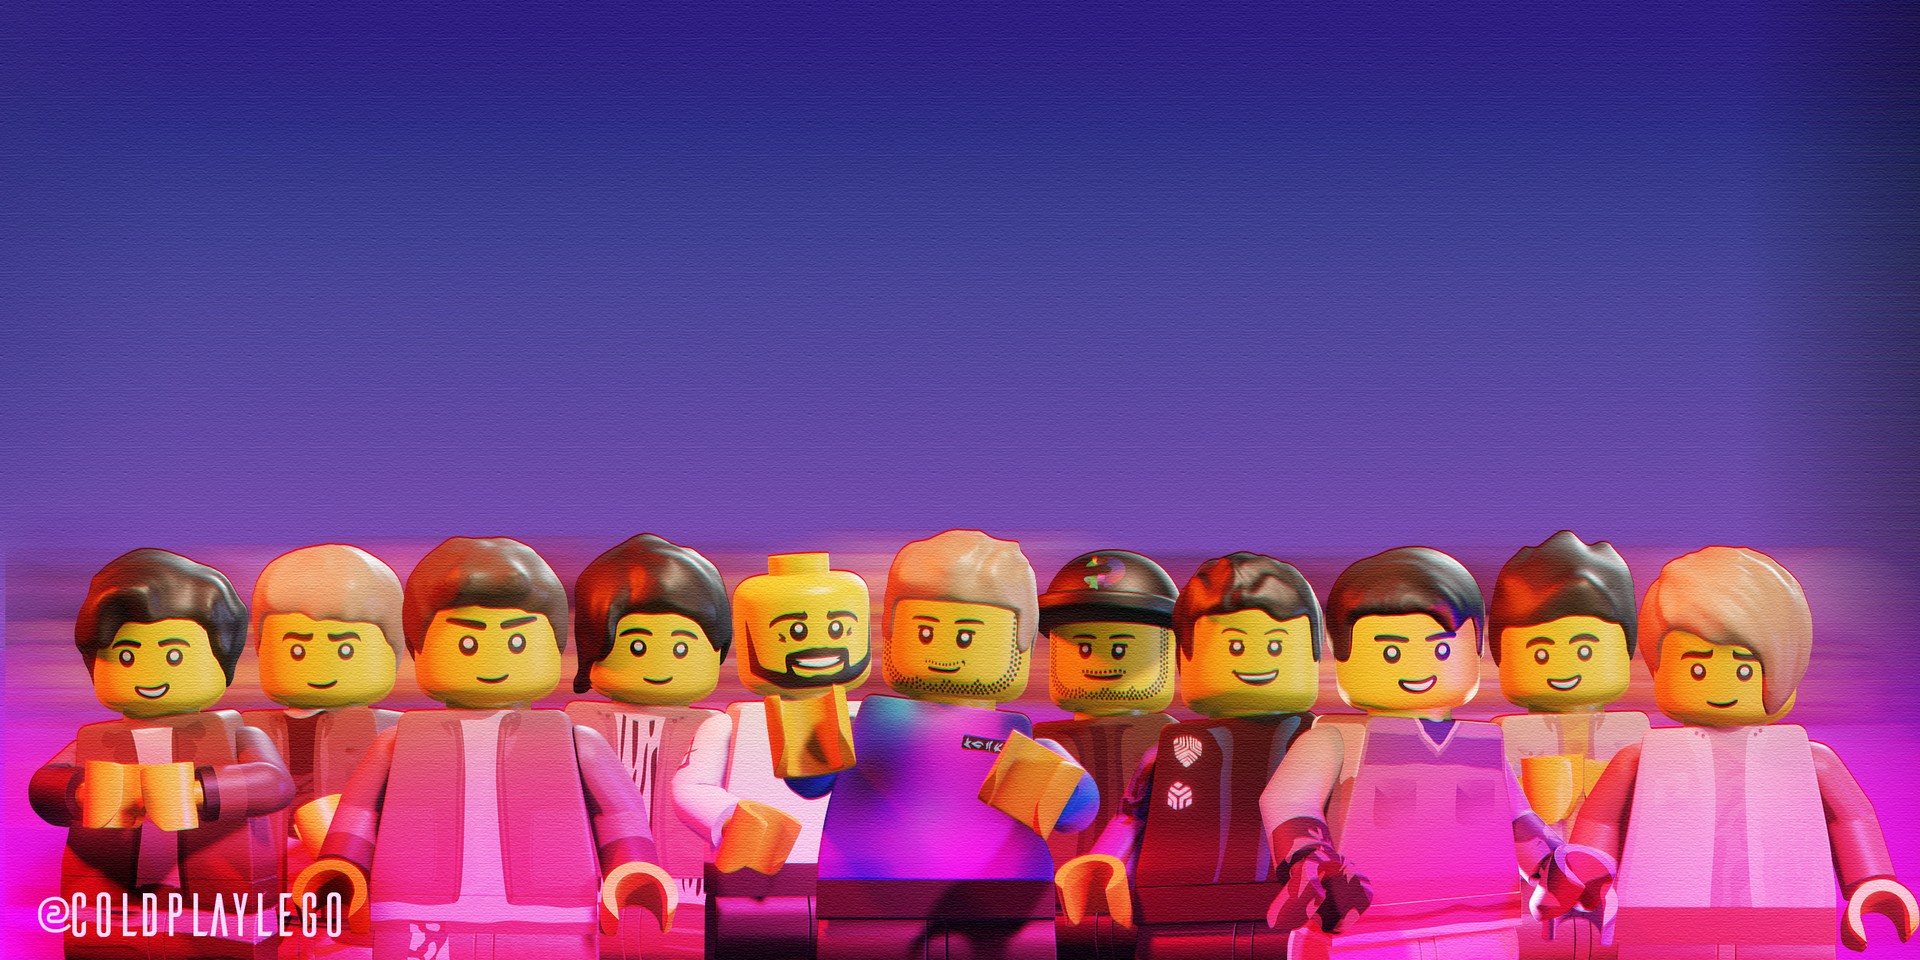 A fan recreates Coldplay and BTS' 'My Universe' music video in LEGOs — watch